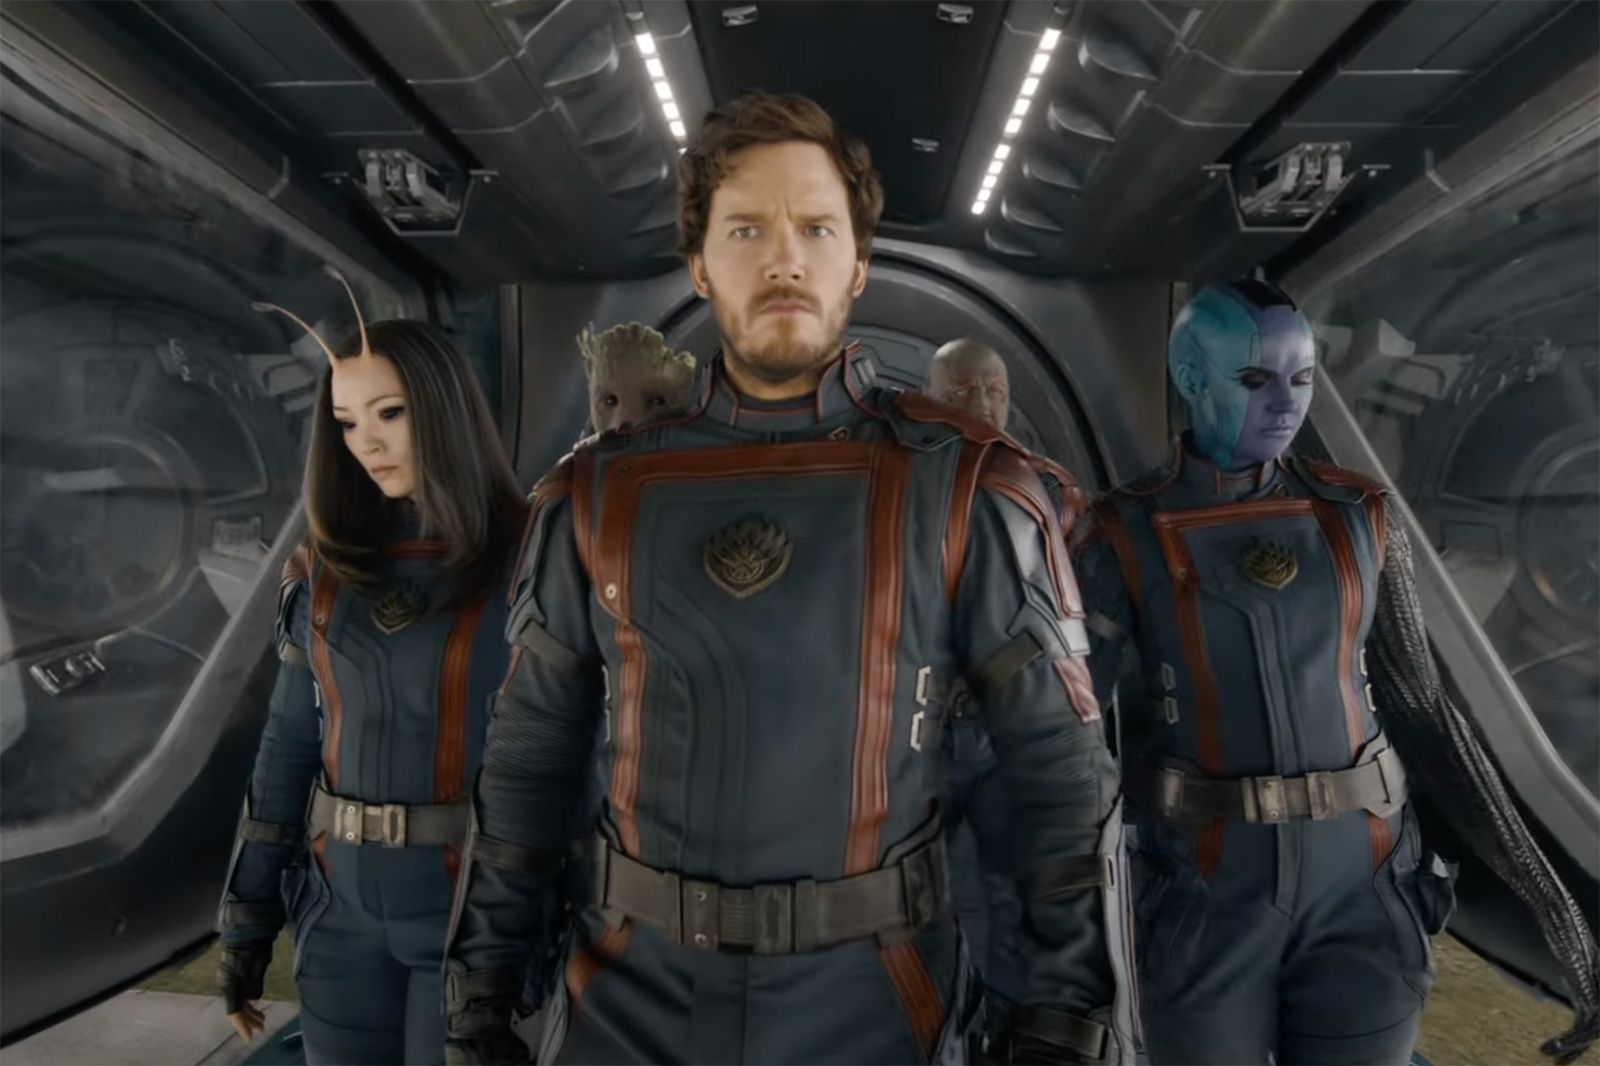 Guardians of the Galaxy Vol. 3' trailer drops with great tunes and a Rocket backstory